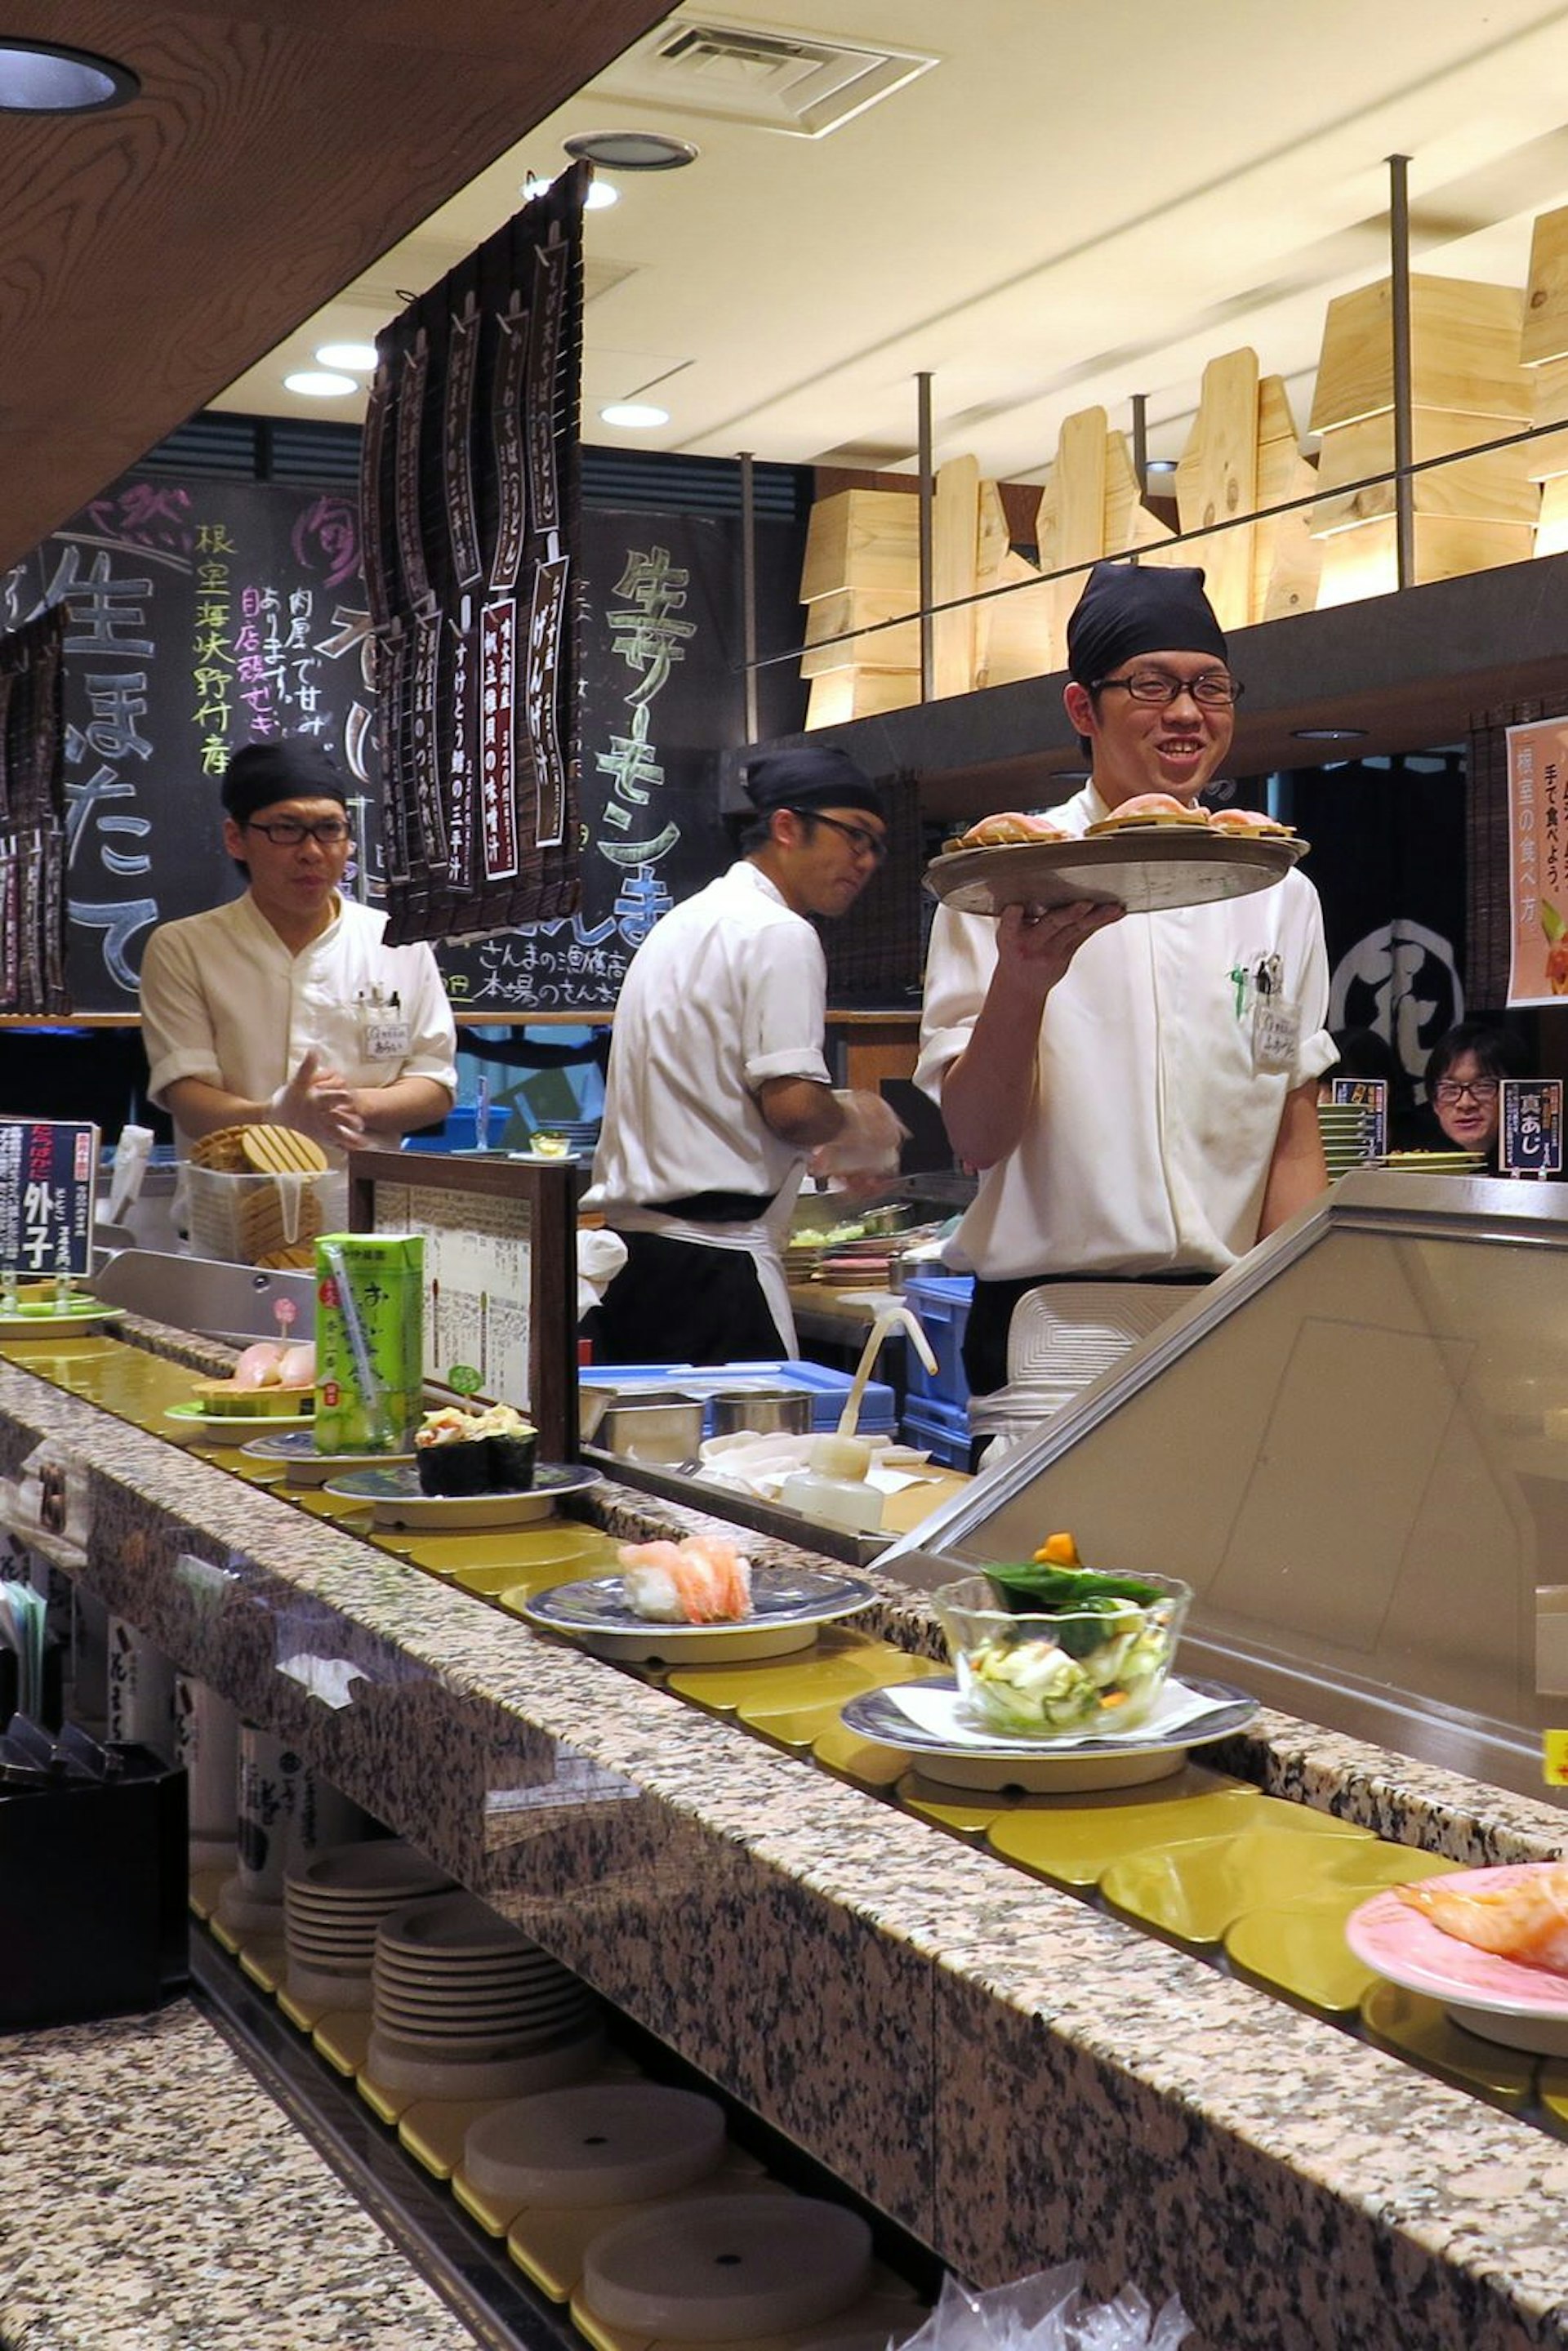 Chefs working behind the counter as plates of sushi pass by on the conveyor belt